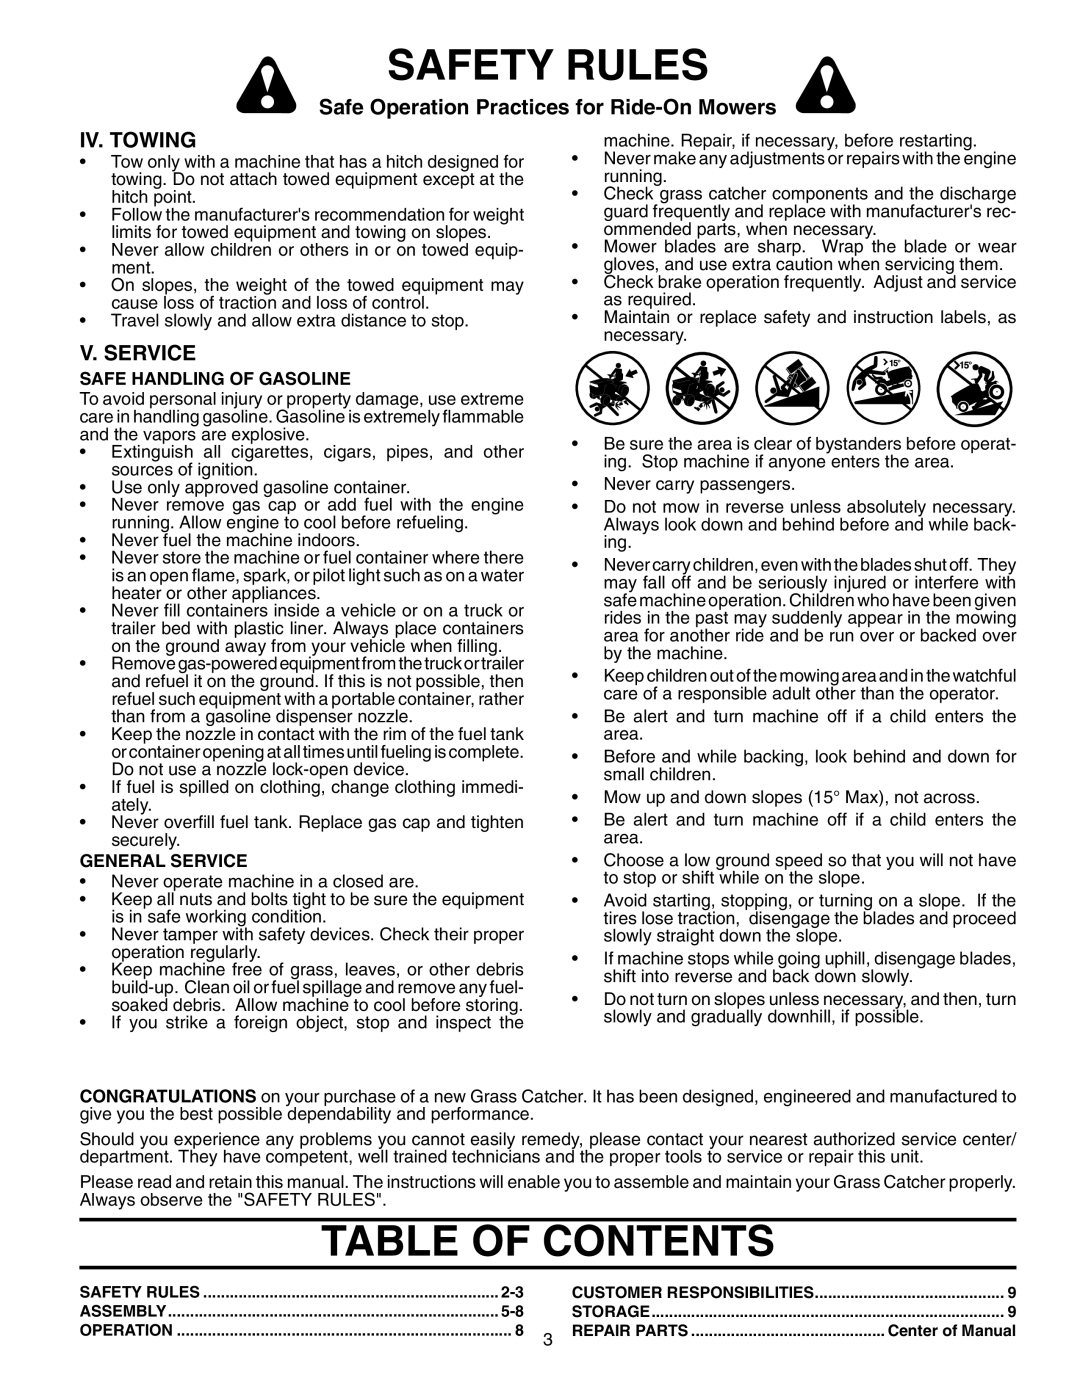 Husqvarna H346SL Table Of Contents, Iv. Towing, V. Service, Safety Rules, Safe Operation Practices for Ride-On Mowers 